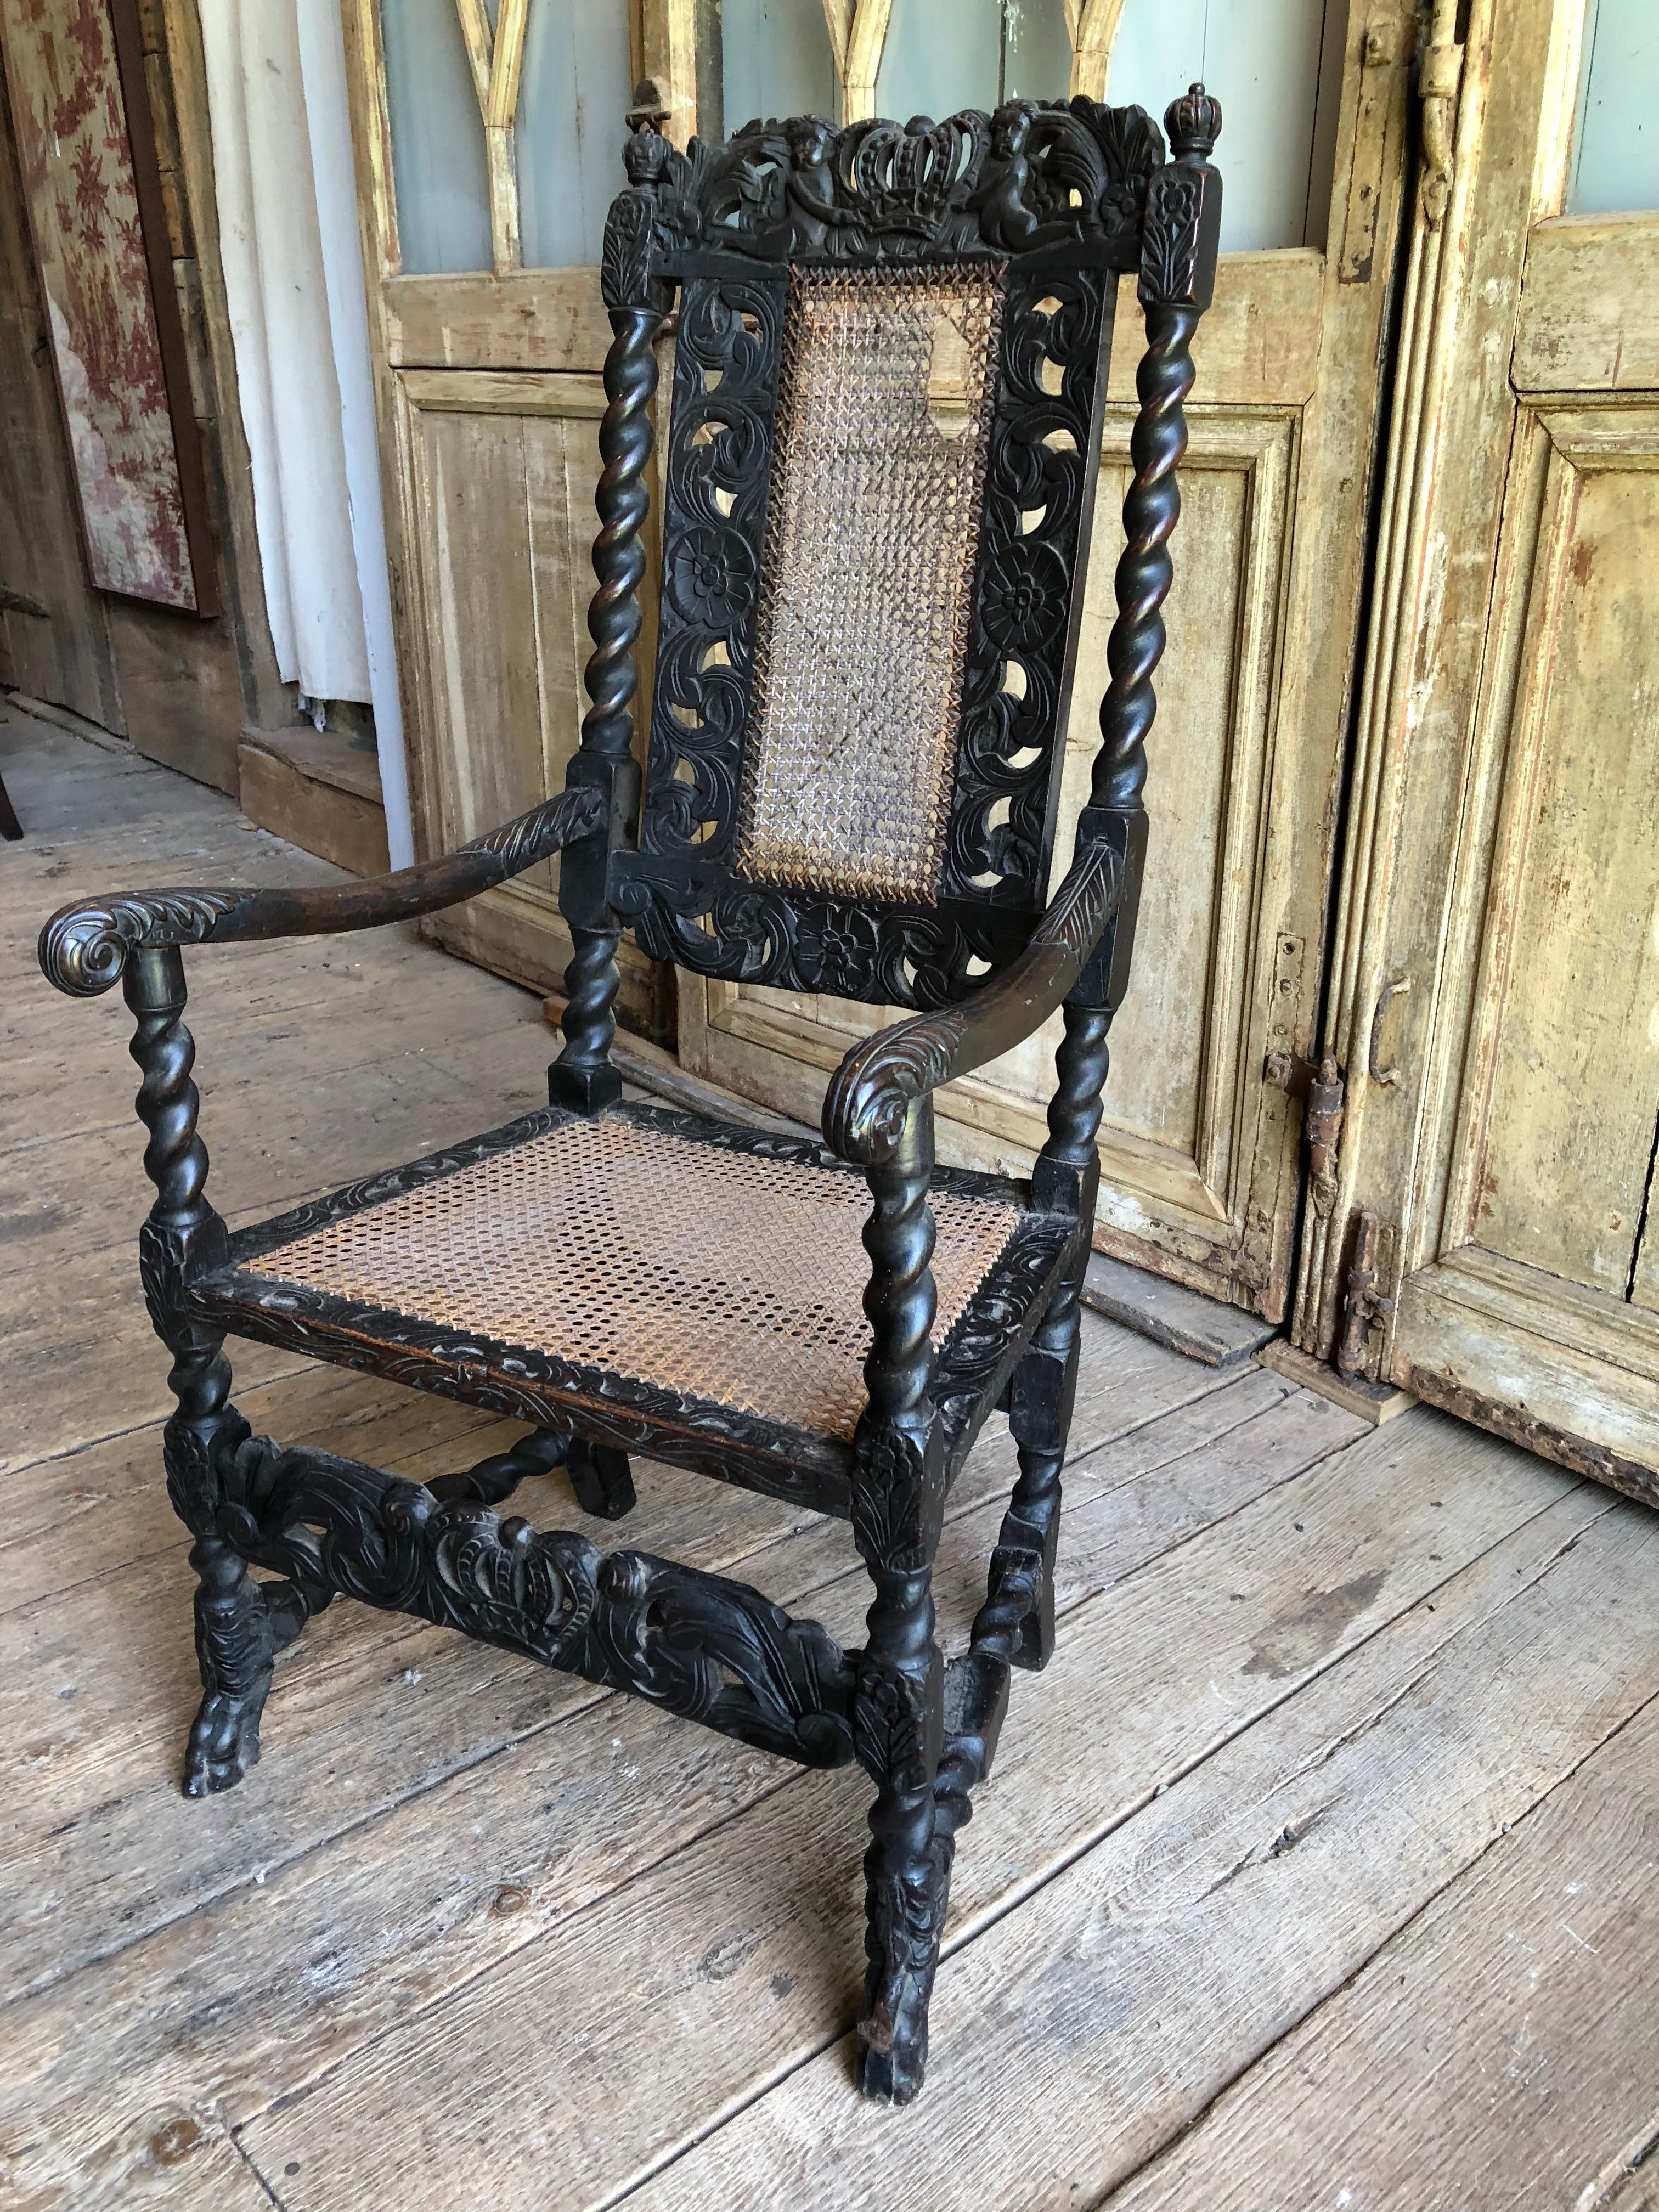 An English, William and Mary Period armchair with caned seat and back, circa 1690-1720, with elaborately carved crest rail with cherubs holding a crown, twist-form back and arm supports and carved side panels and bottom panel. 
Oak, with original